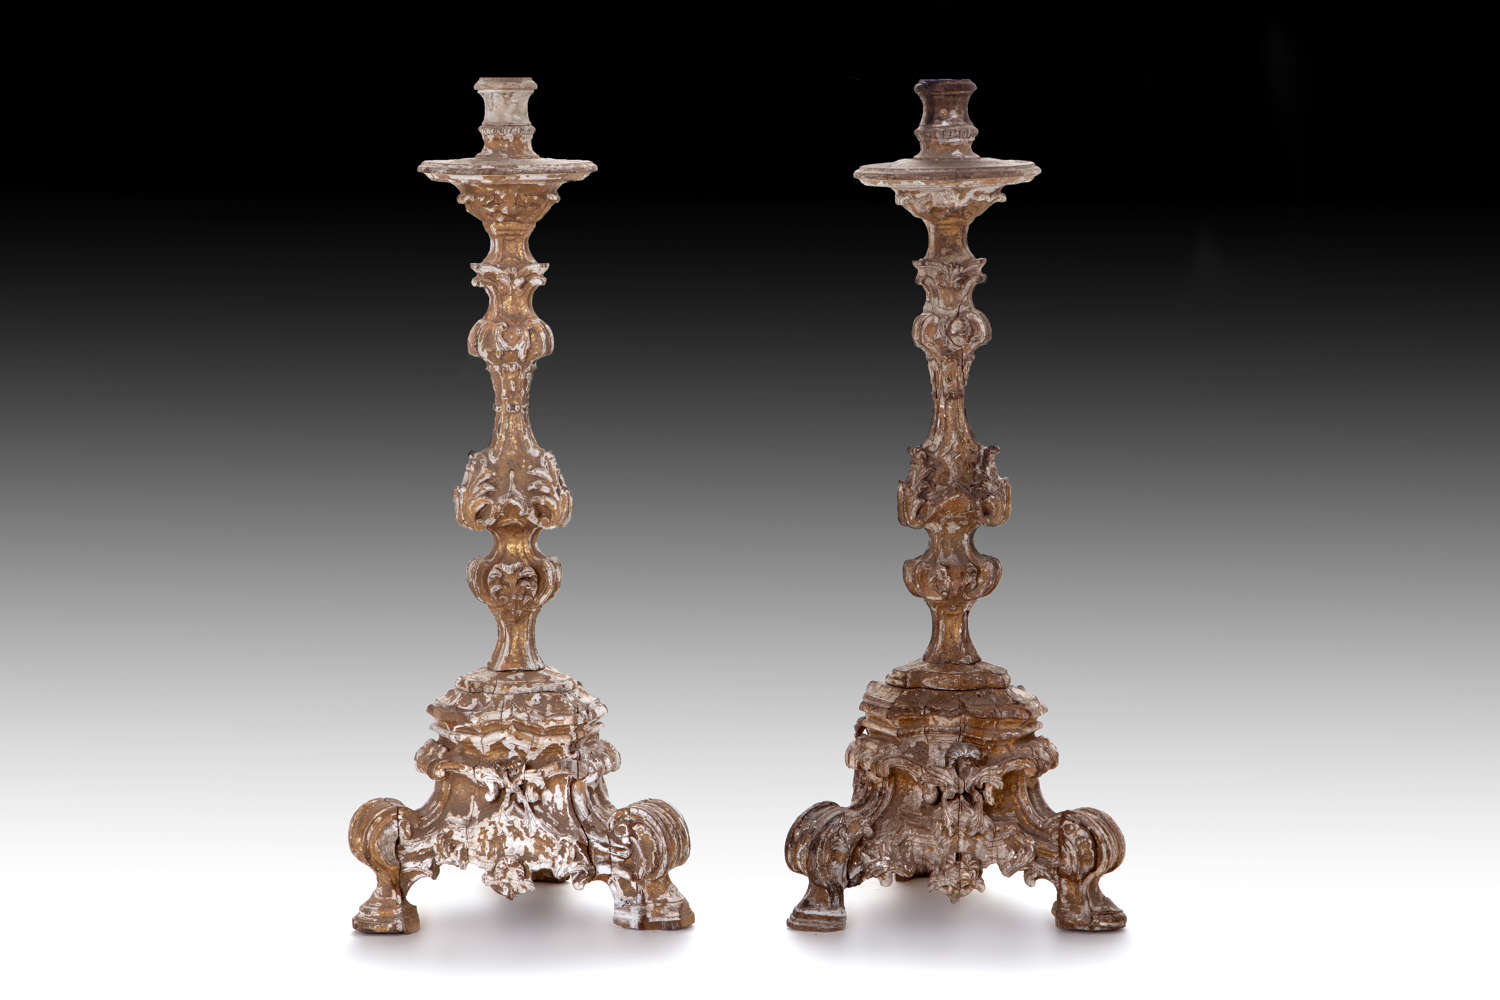 A pair of late 17th century giltwood candlesticks